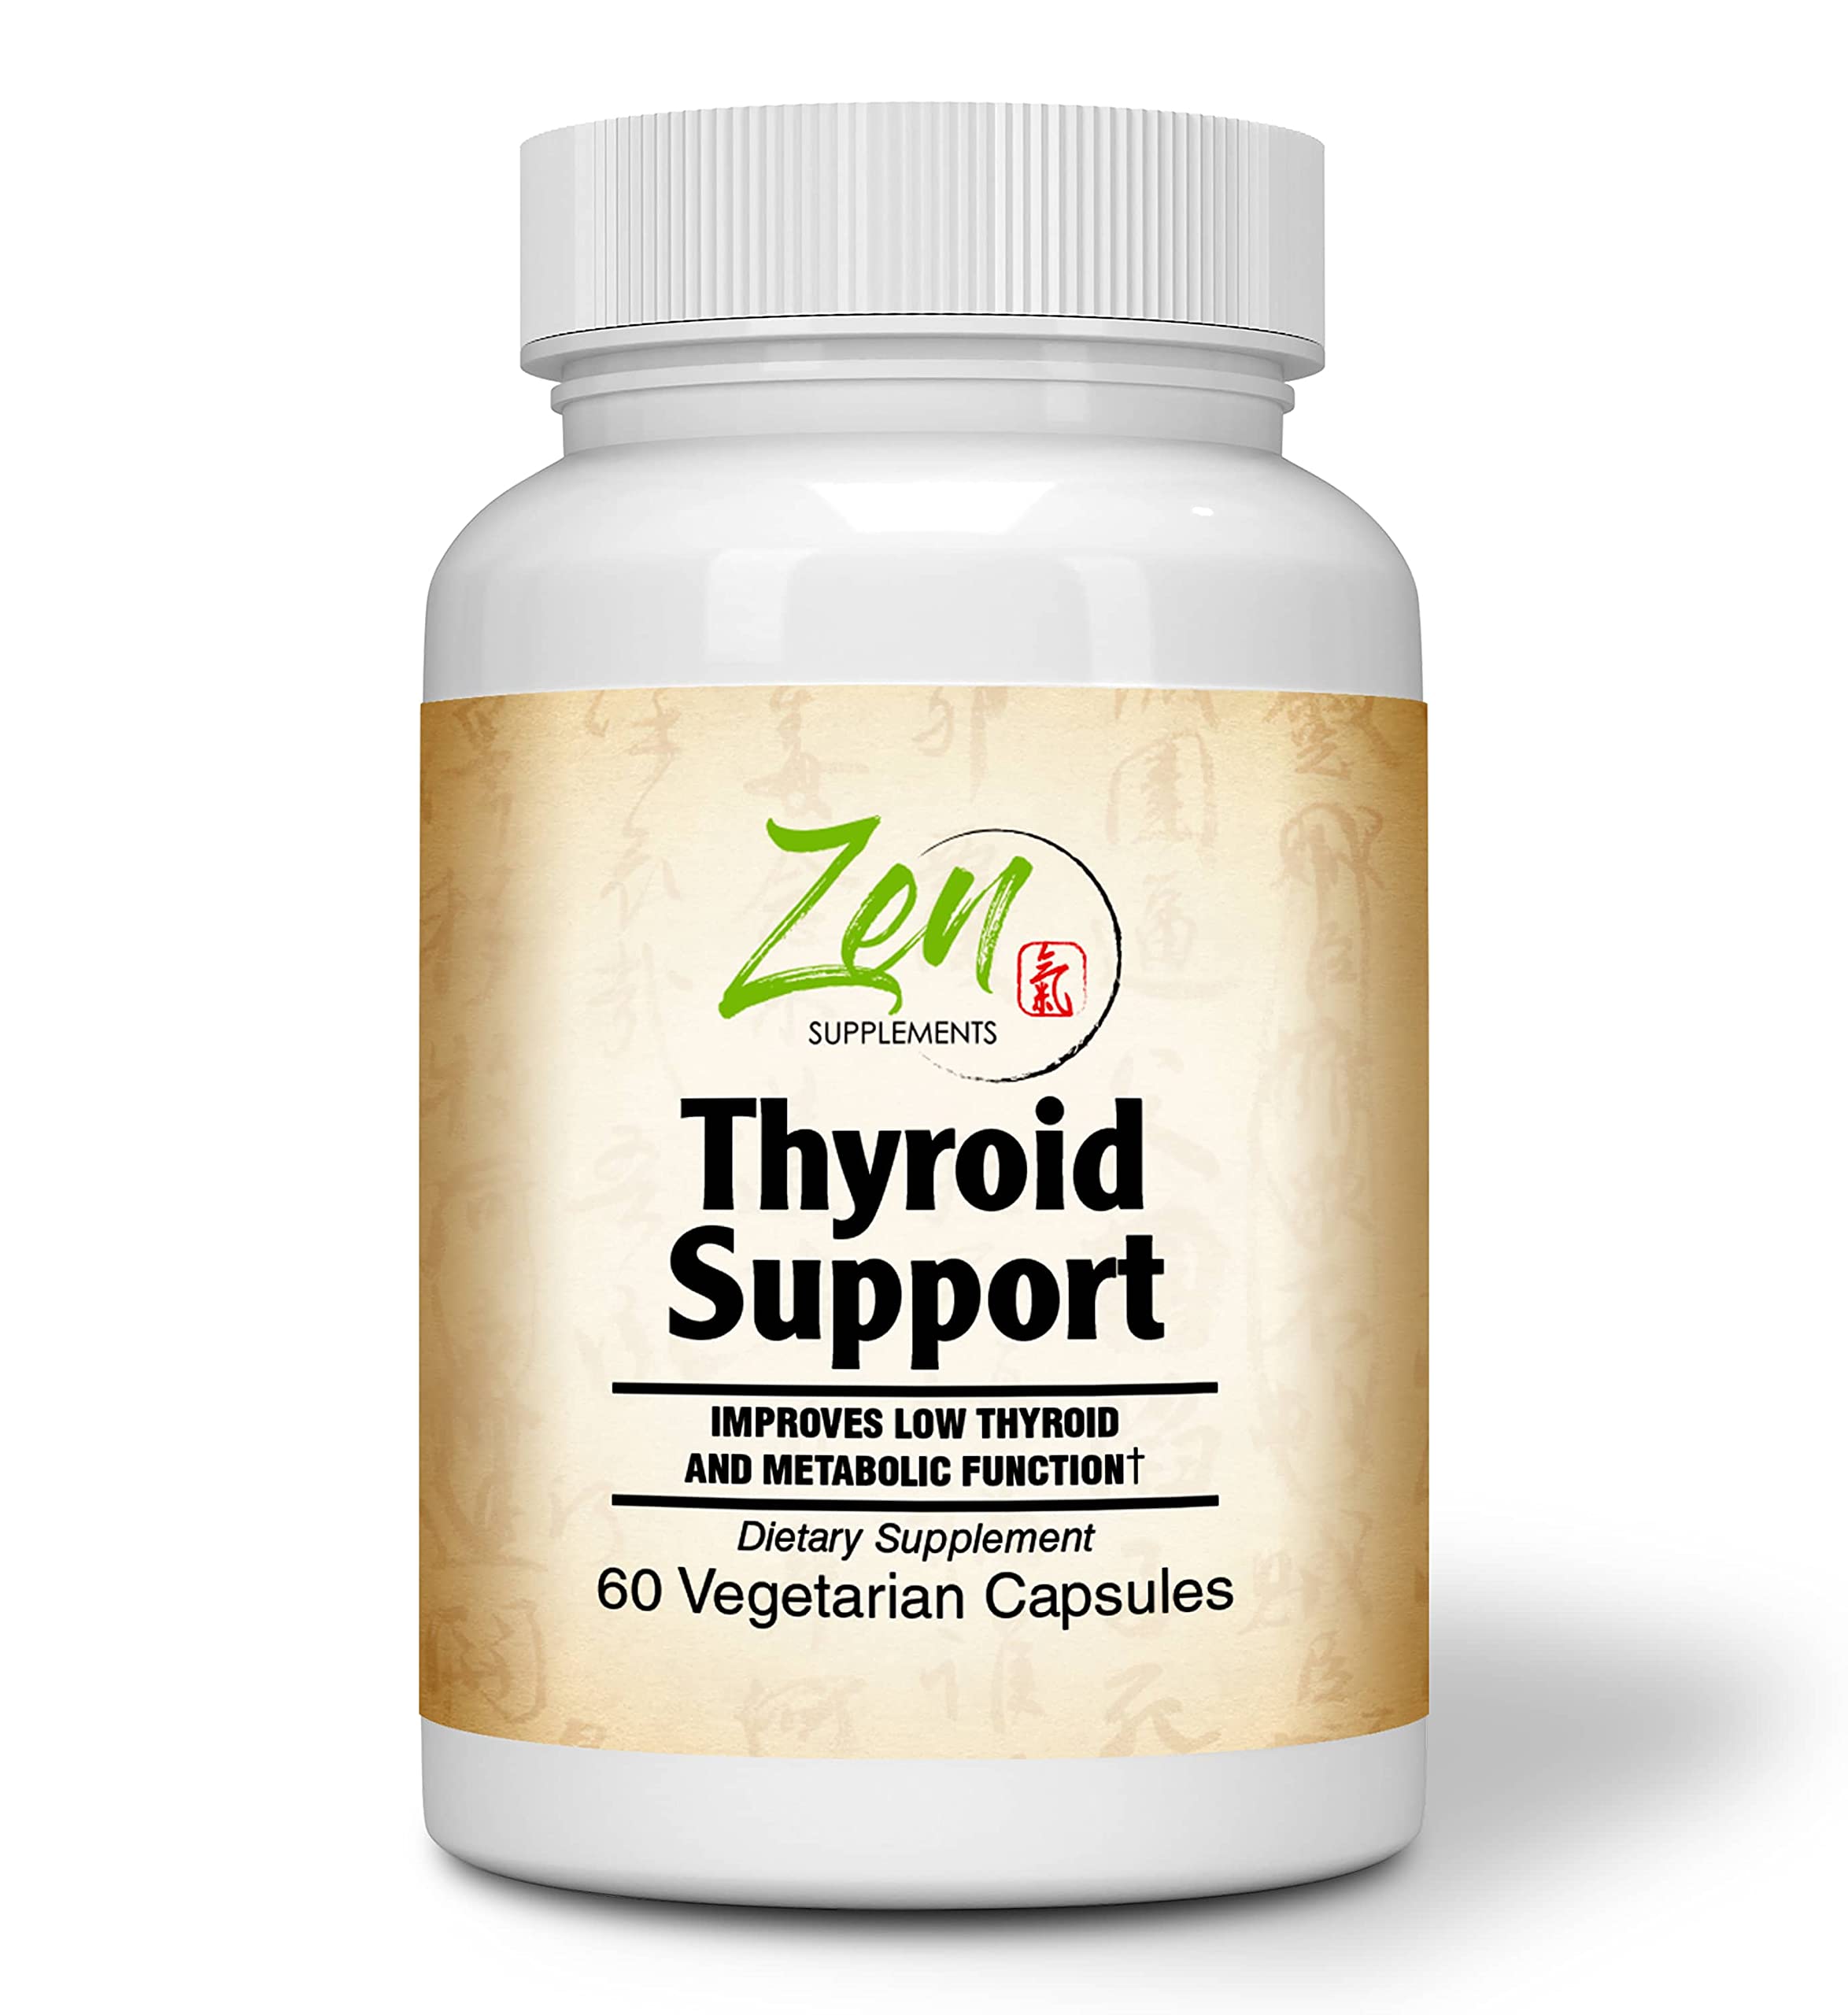 Zen Supplements - Thyroid Support - Promotes Metabolism from Green Tea, Energy & Focus from Ashwagundha, Bacopa & L-Tyrosine to Boost Concentration, Memory, Mood & Clear Brain Fog and GuguLipid for Cholesterol 60-Vegcaps